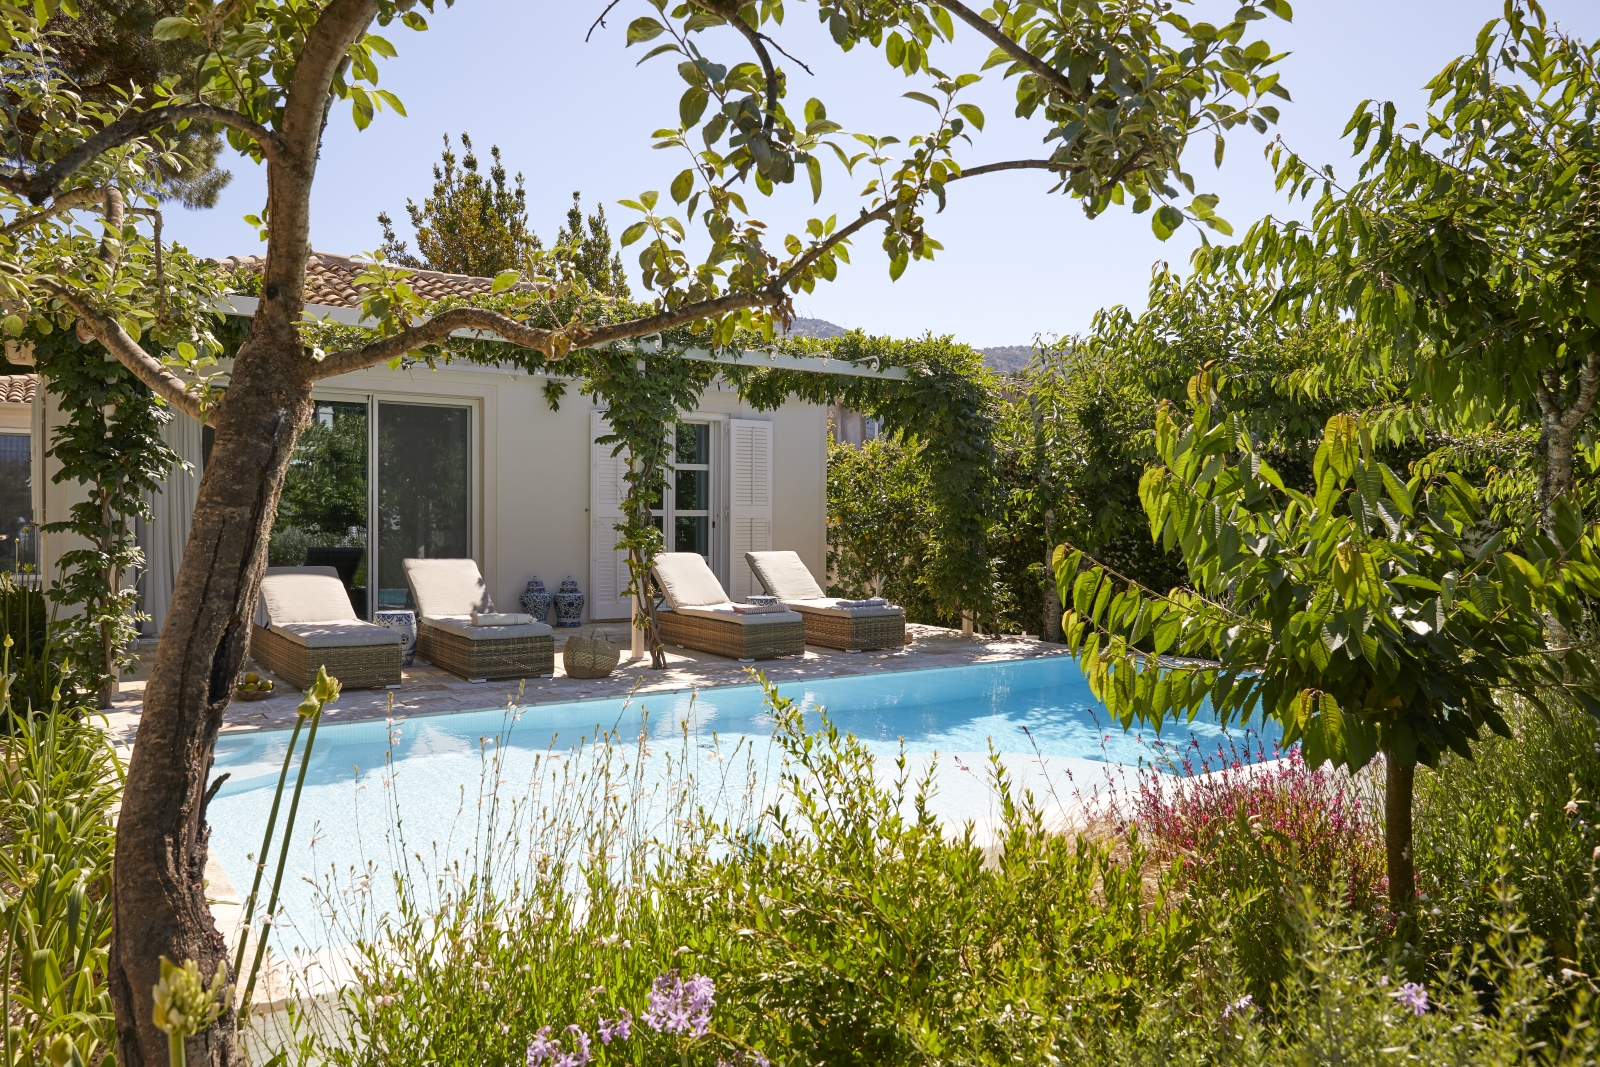 Pool and pool area with sun loungers, flowers and plants at Kogevina Beach Villa on Corfu, Greece